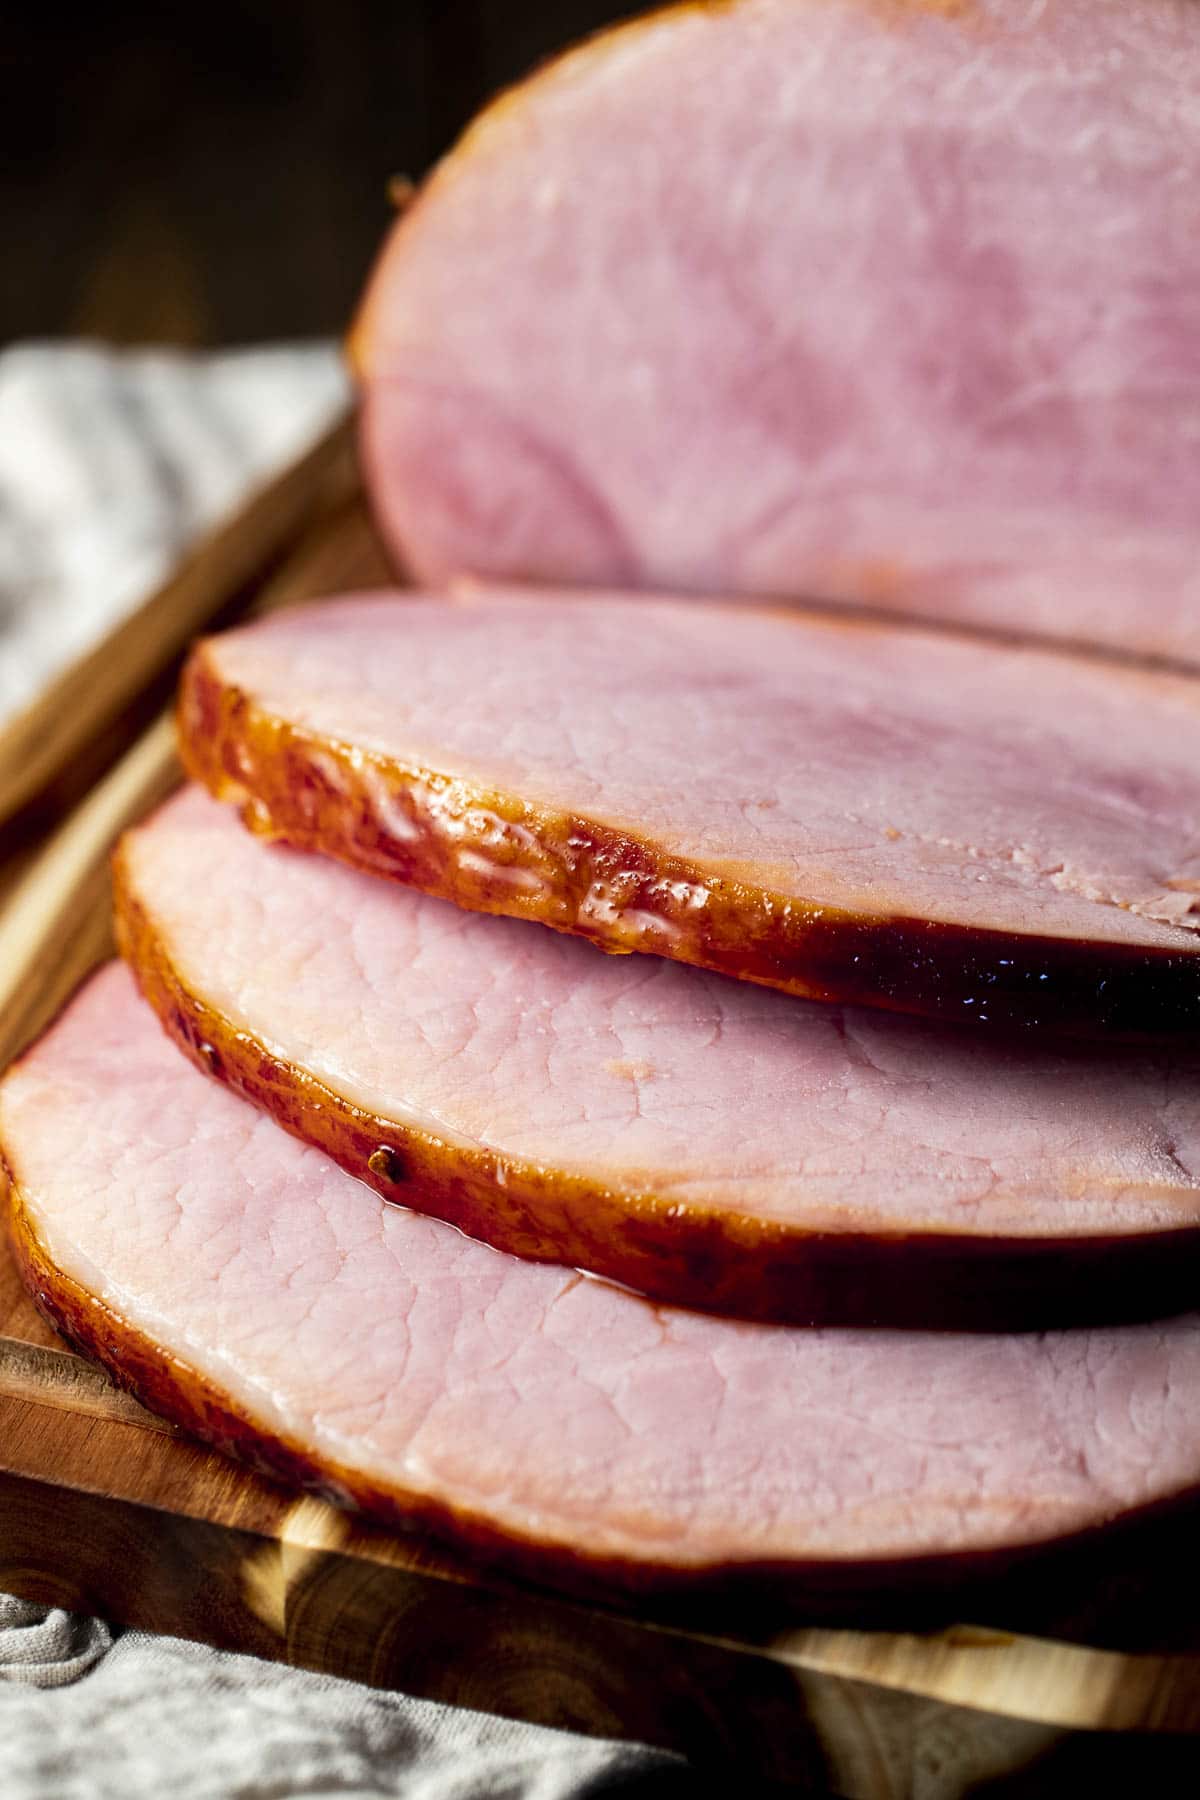 Side view of thick slices of ham on a wooden board.